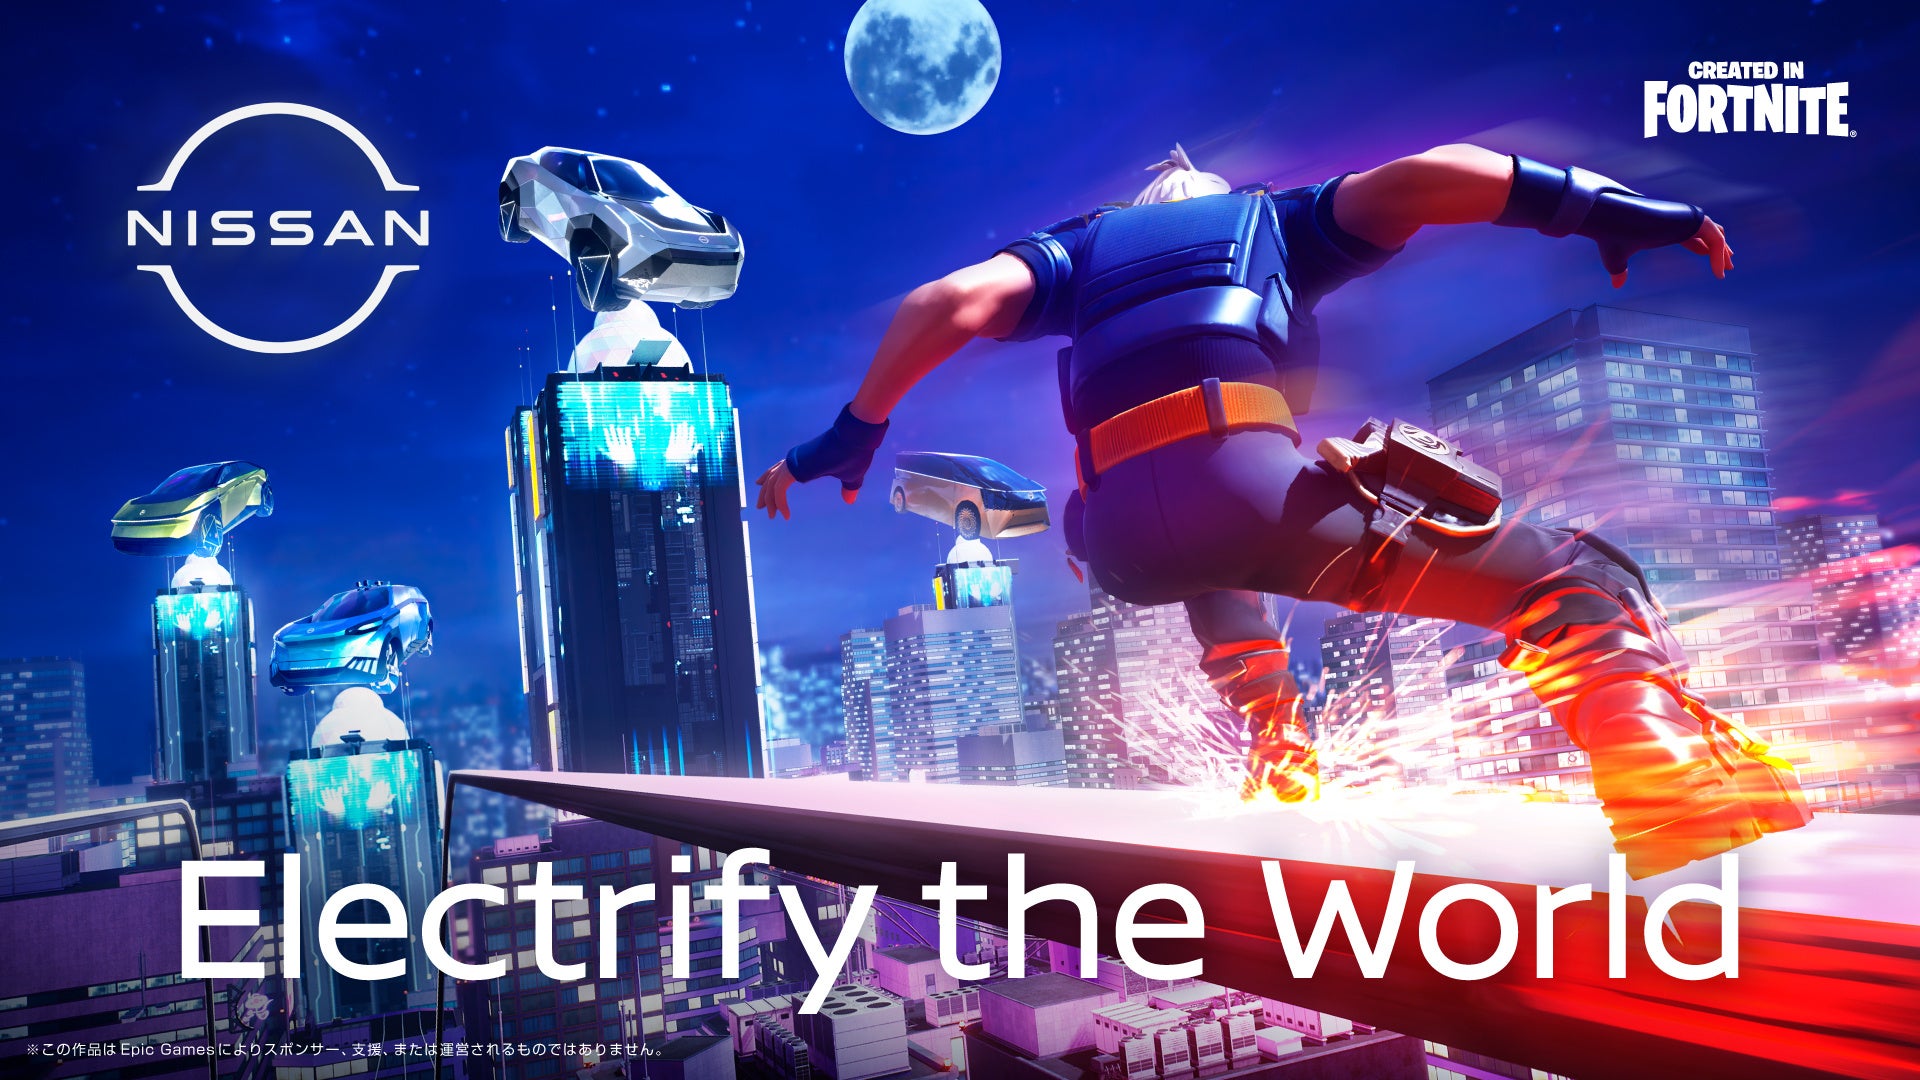 JAPAN MOBILITY SHOW 2023との同時企画！人気ゲーム「フォートナイト」に日産が描く未来の世界「Electrify the World」が登場